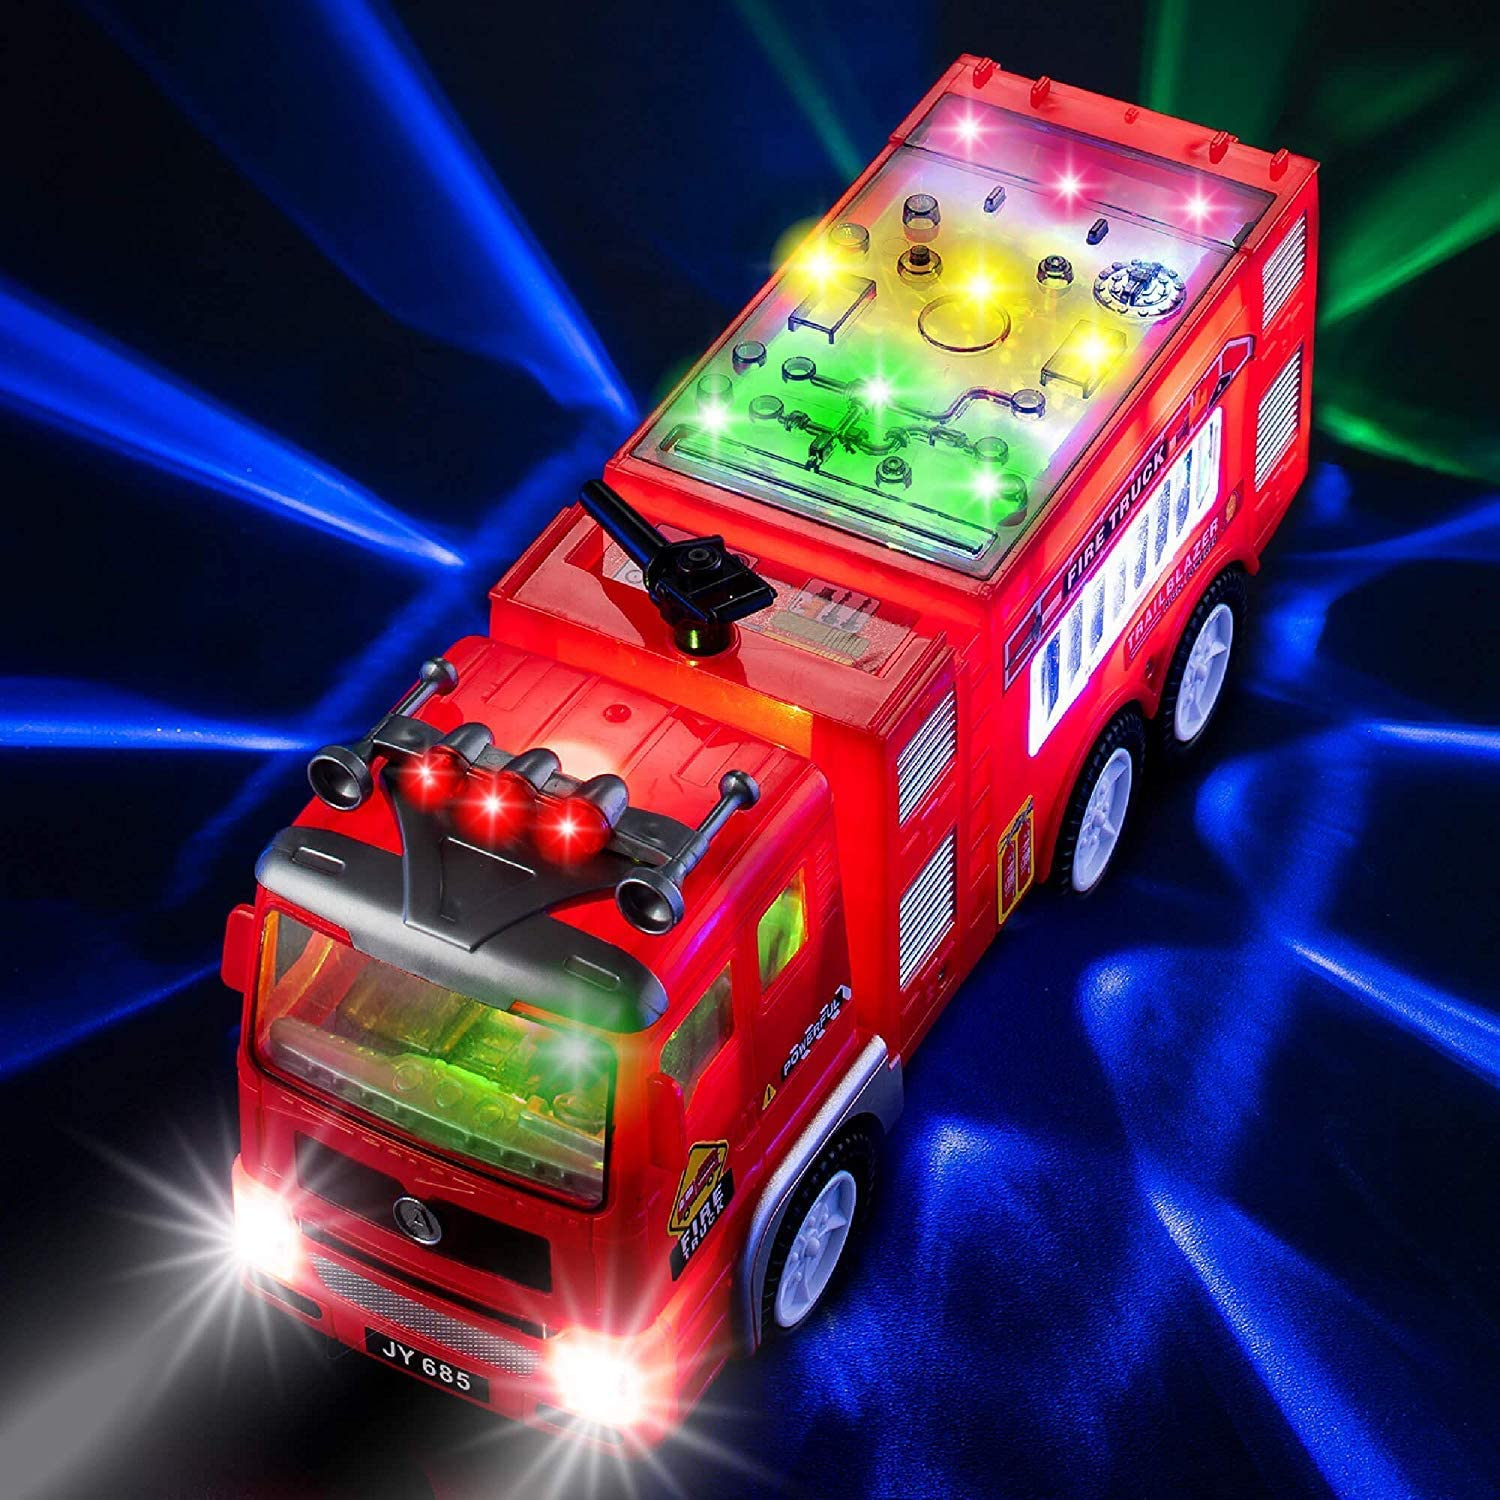 Amazon.com: Electric Fire Truck Kids Toy - with Bright Flashing 4D Lights & Real Siren Sounds